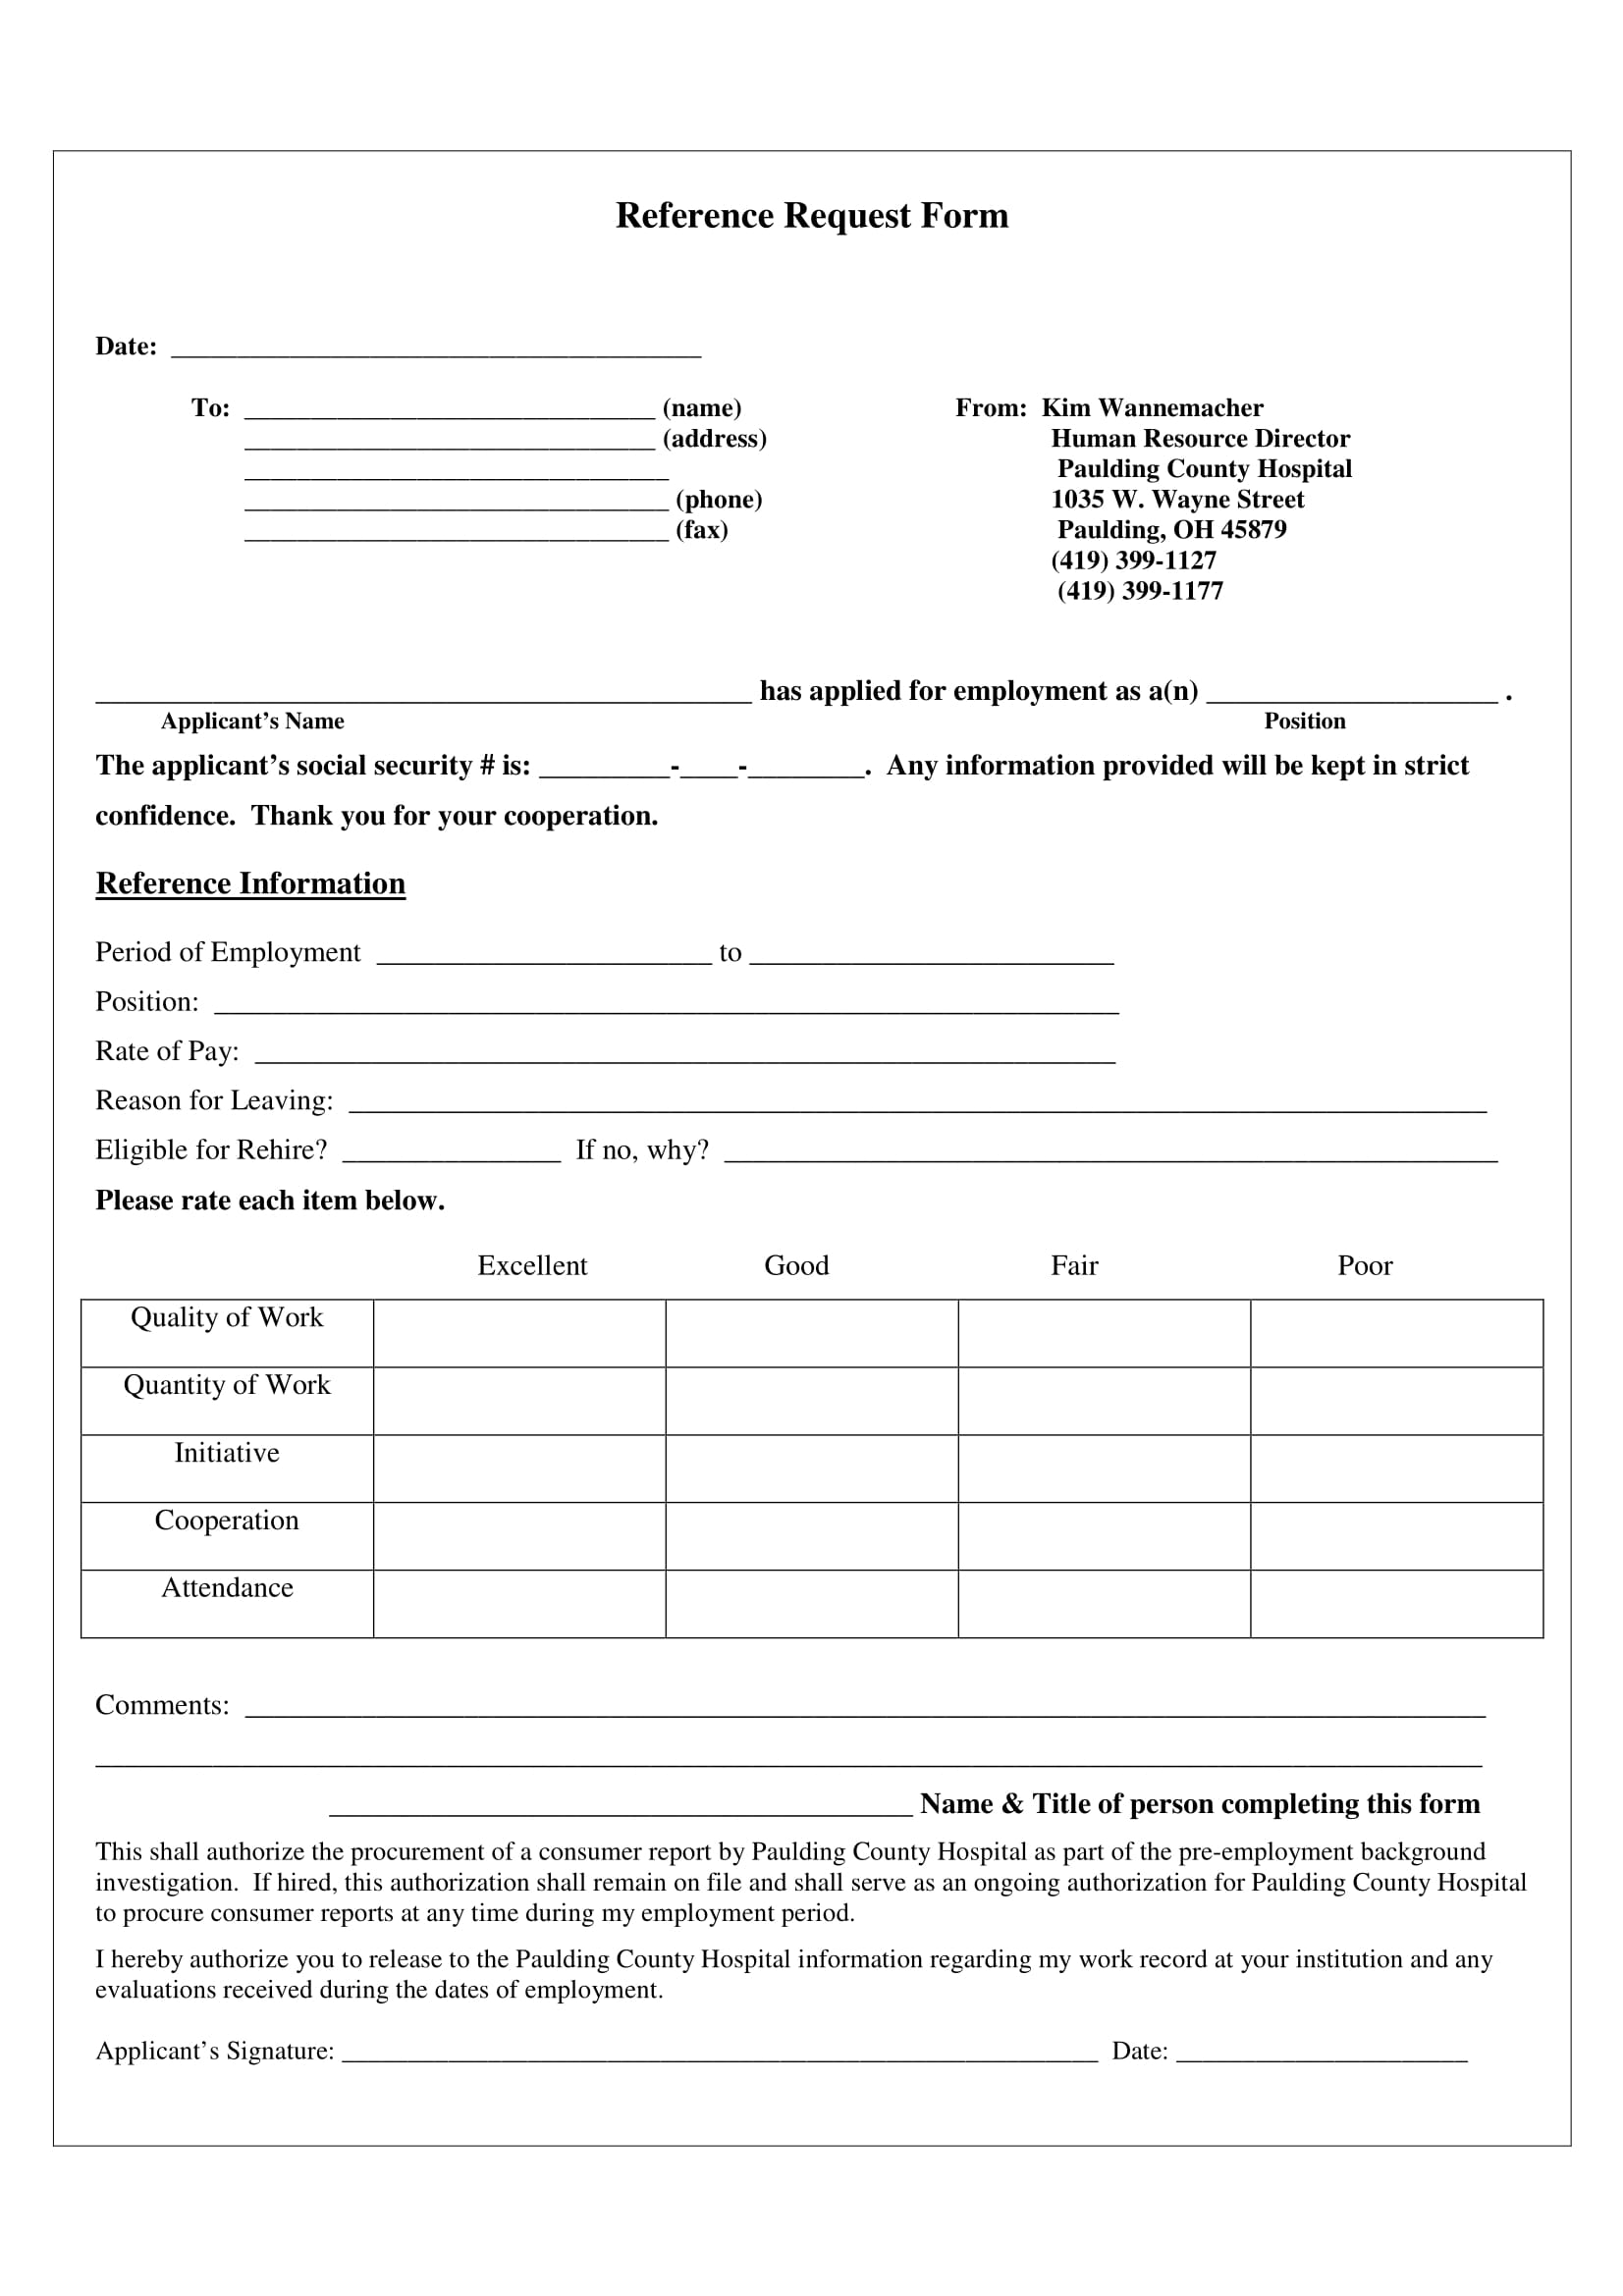 applicant reference request form 1